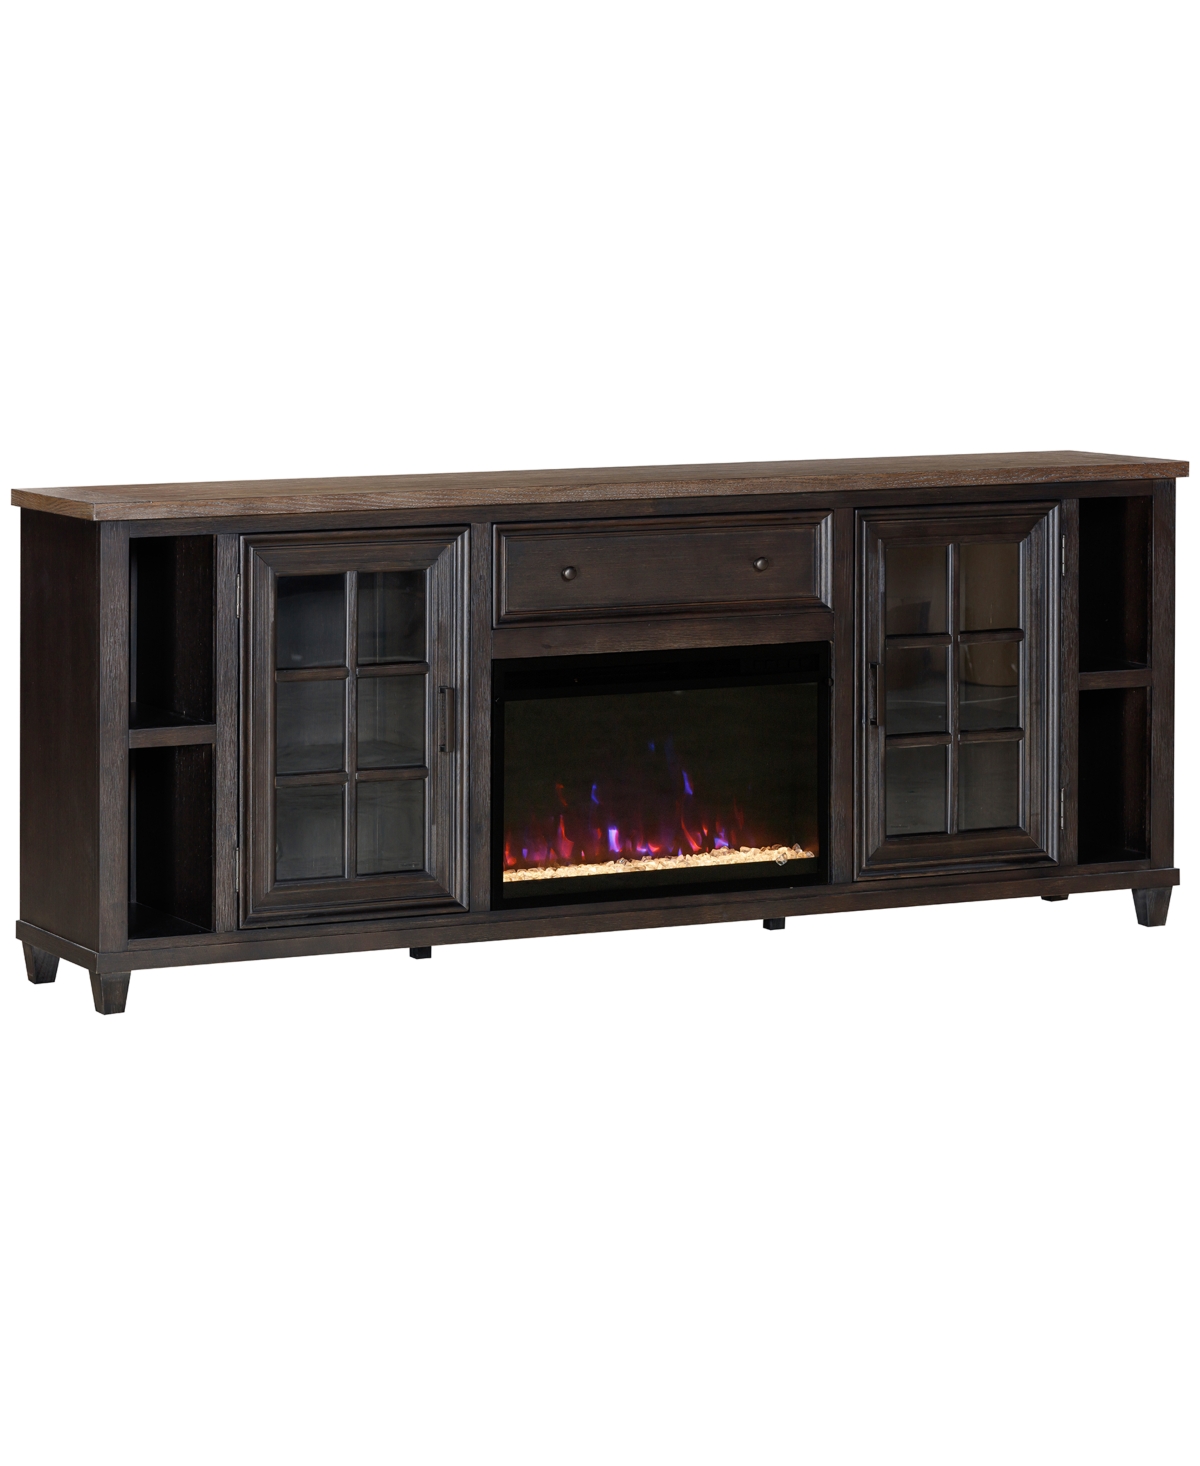 Macy's 84" Dawnwood 2pc Tv Console Set (84" Console And Fireplace) In Espresso